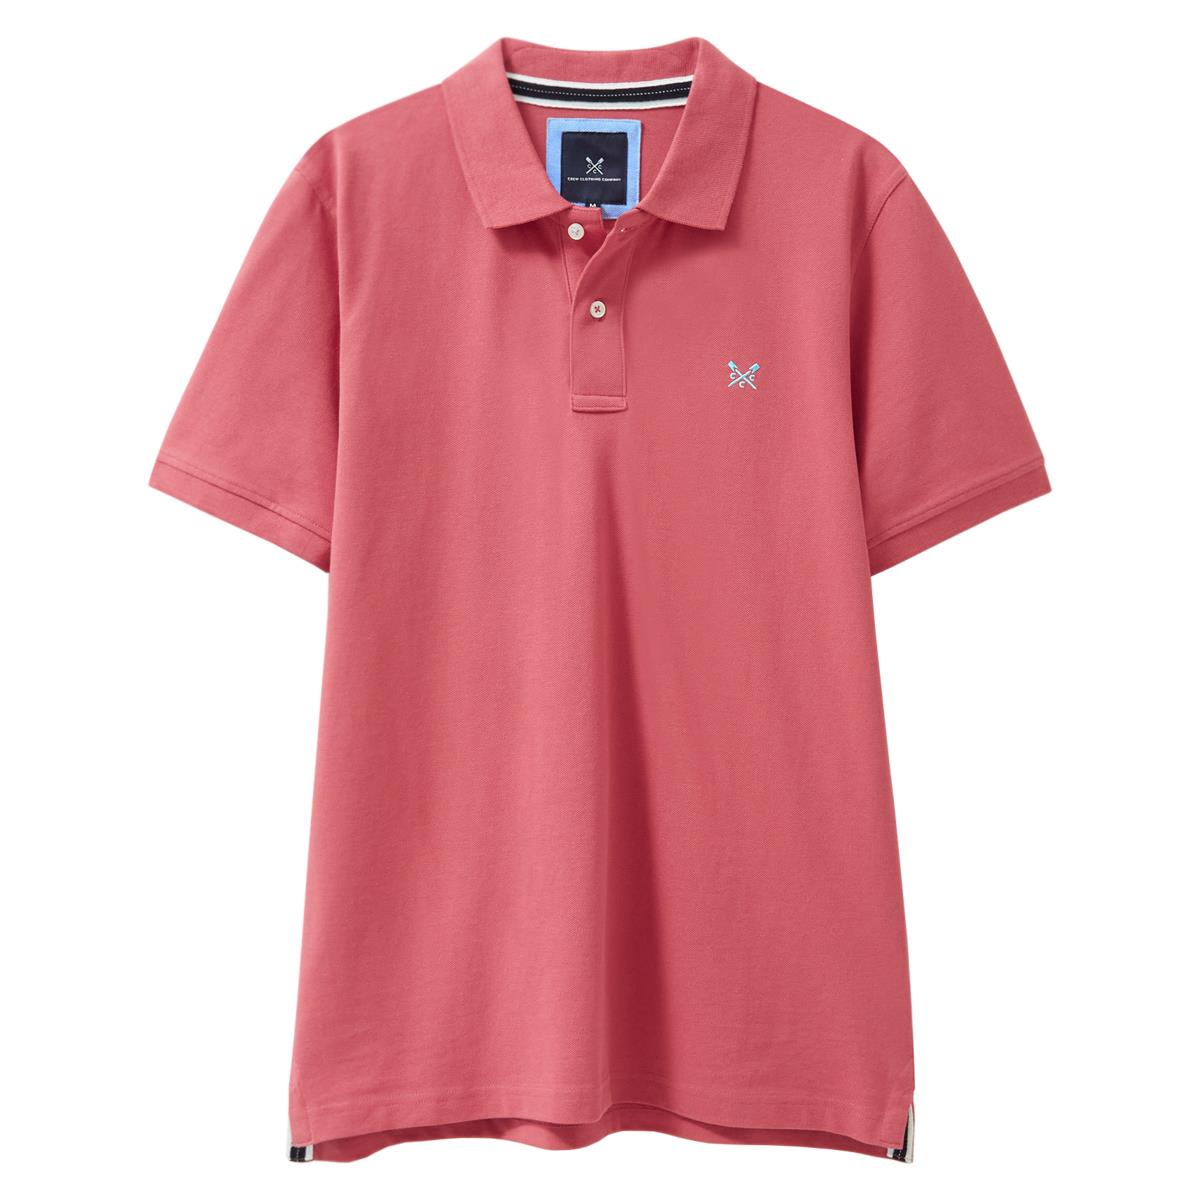 What is the reference number for Crew Clothing's Classic Pique Polo Shirt?